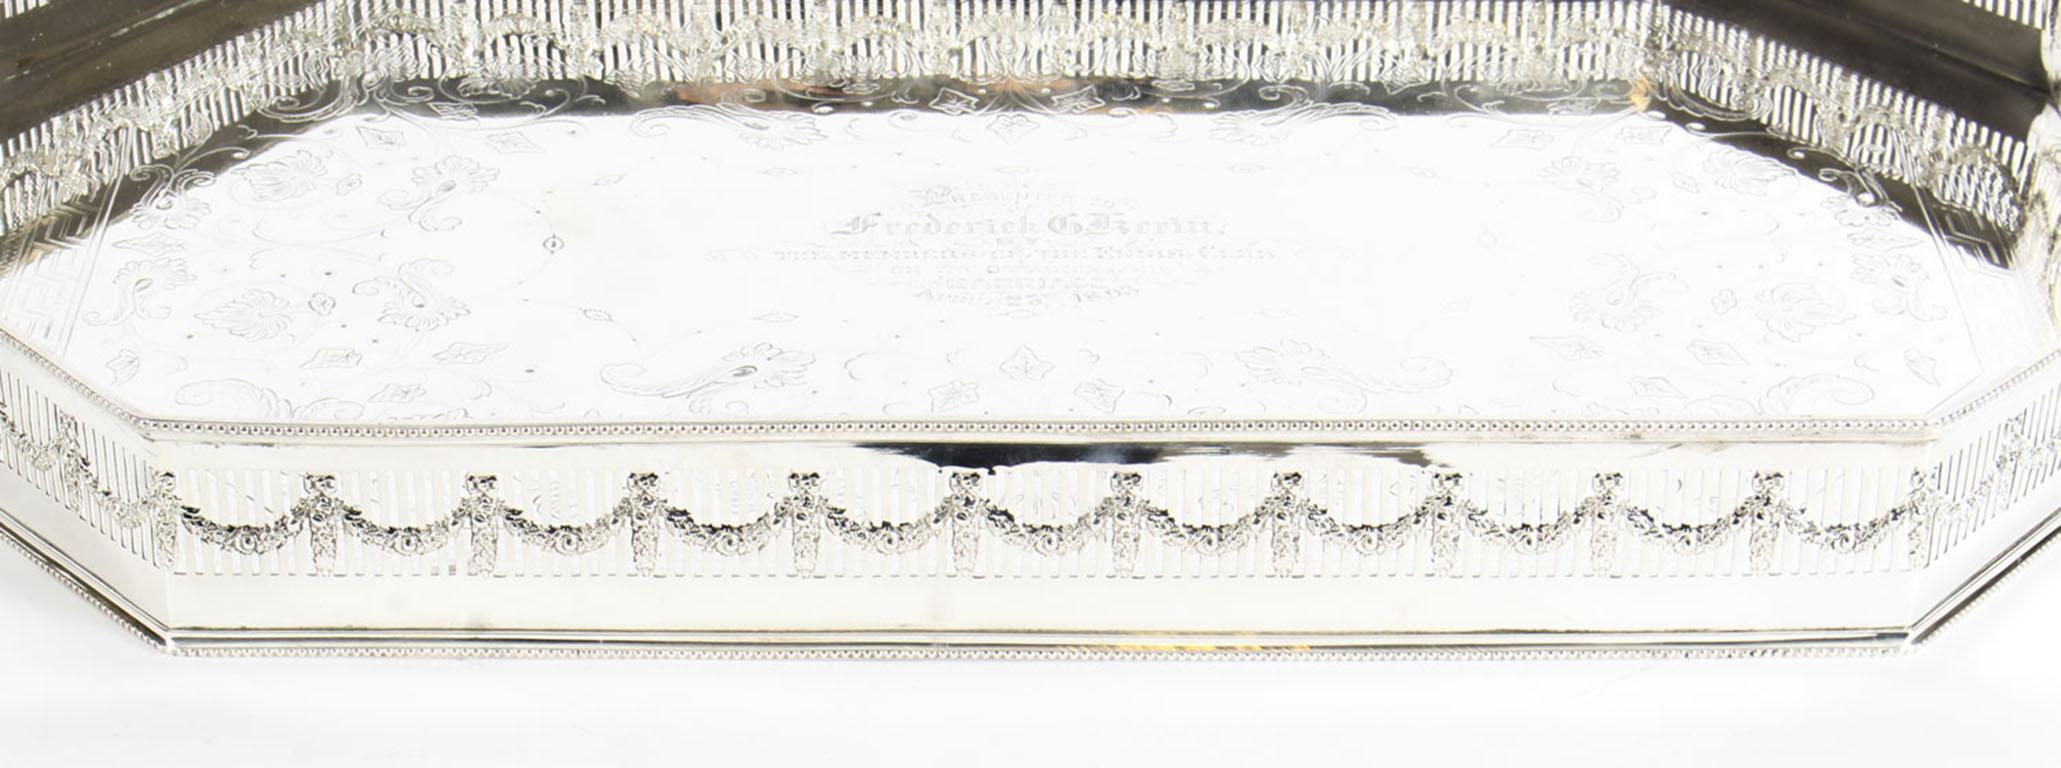 Antique Edwardian Silver Plated Gallery Tray, 19th Century 1